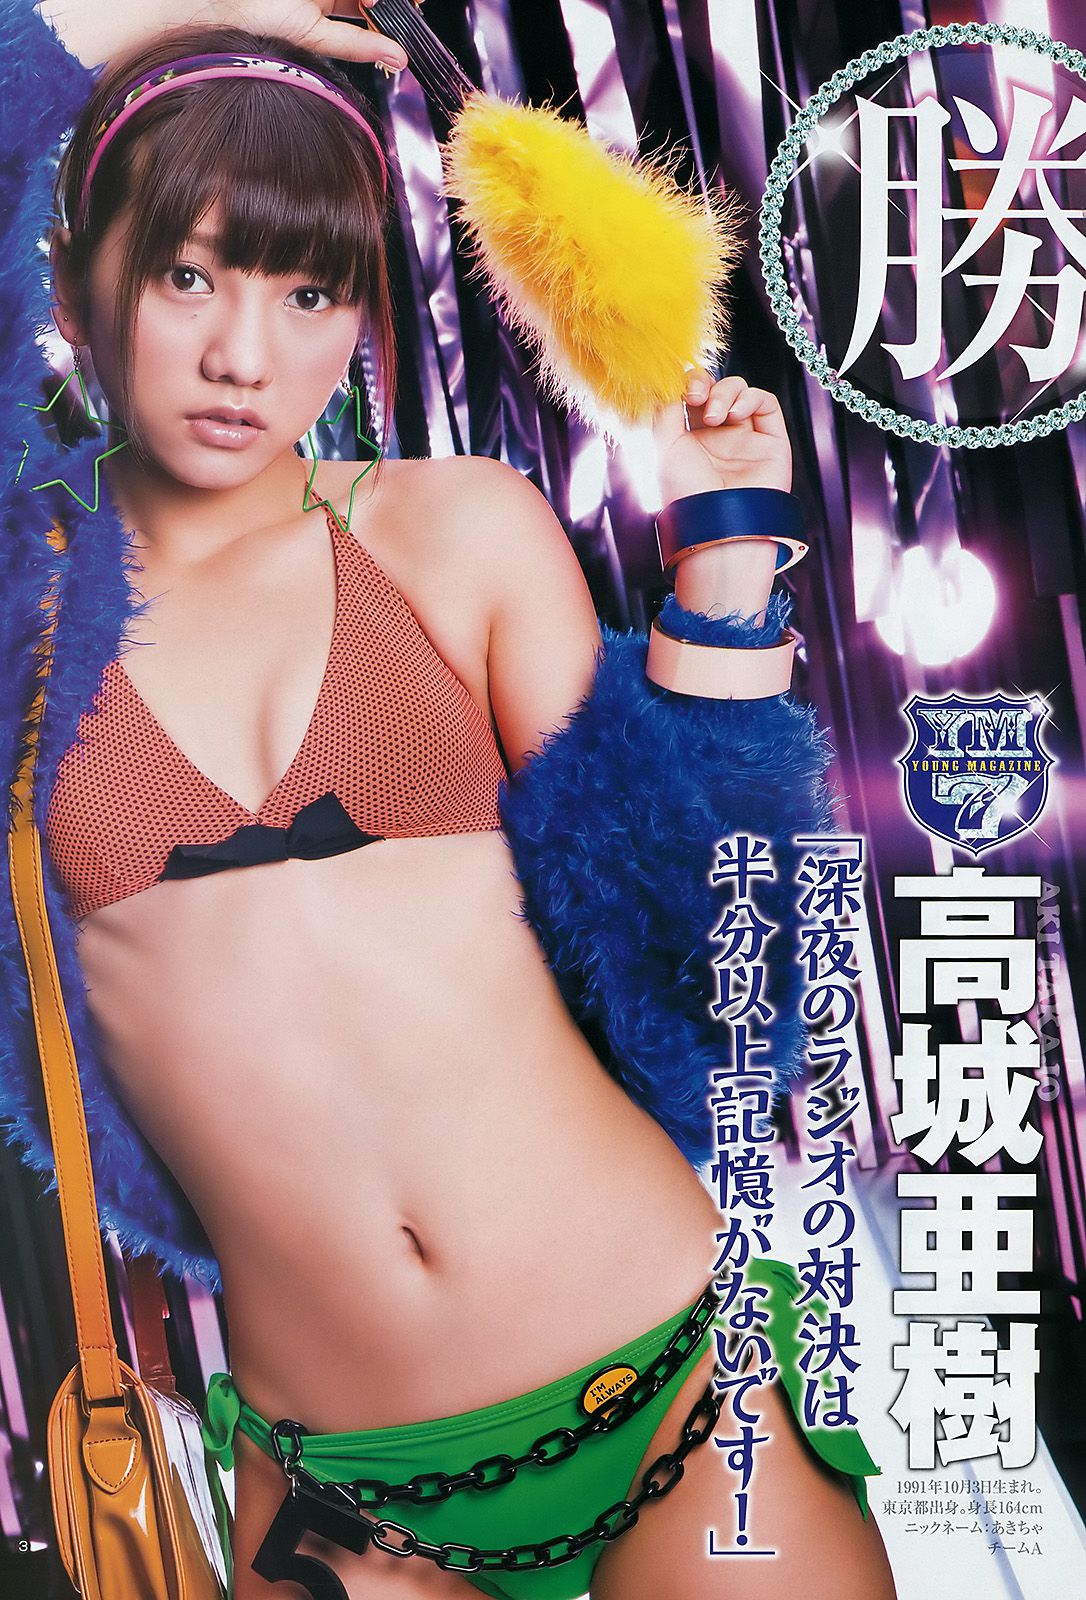 AKB48 YJ7 vs. YM7 神保町・護国寺大戦 FINAL PARTY [Weekly Young Jump] 2012年No.01 写真杂志